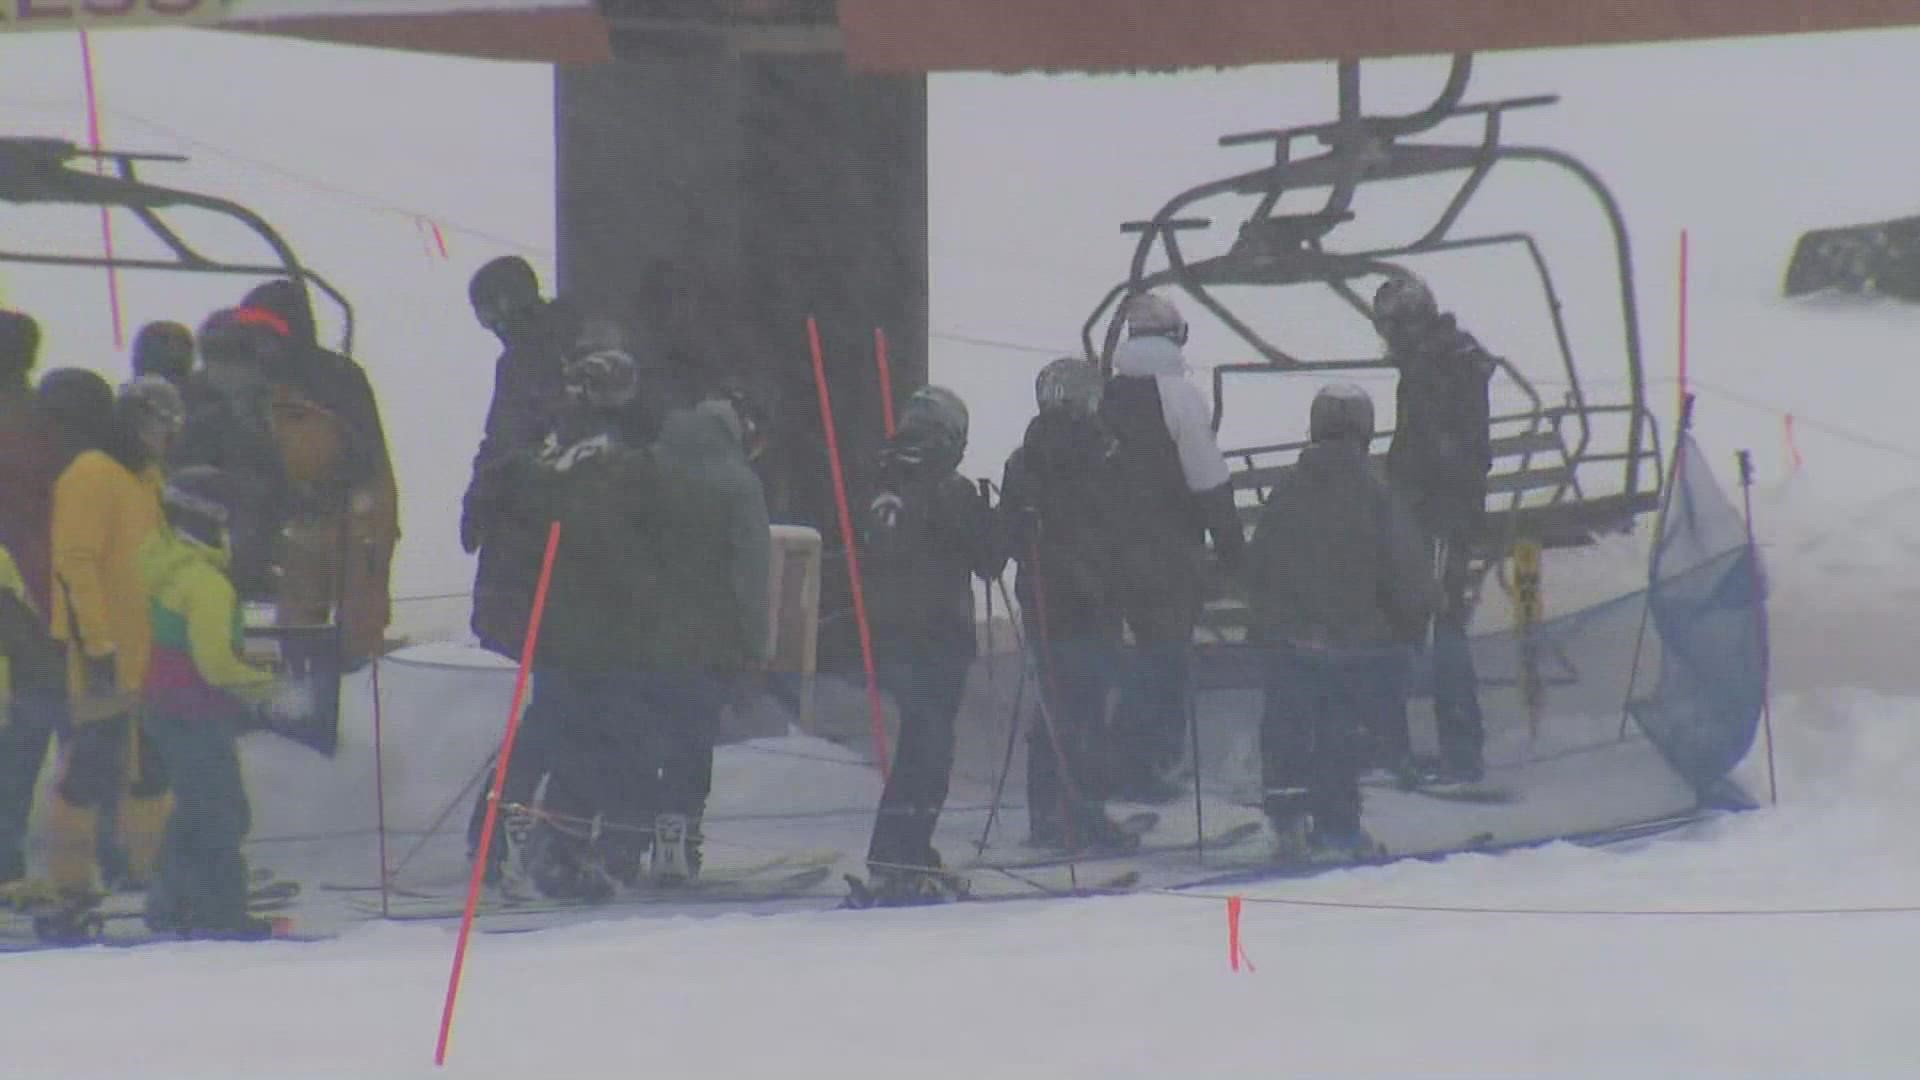 An online petition is gaining traction and accusing the owners of the beloved Stevens Pass ski resort of mismanagement.